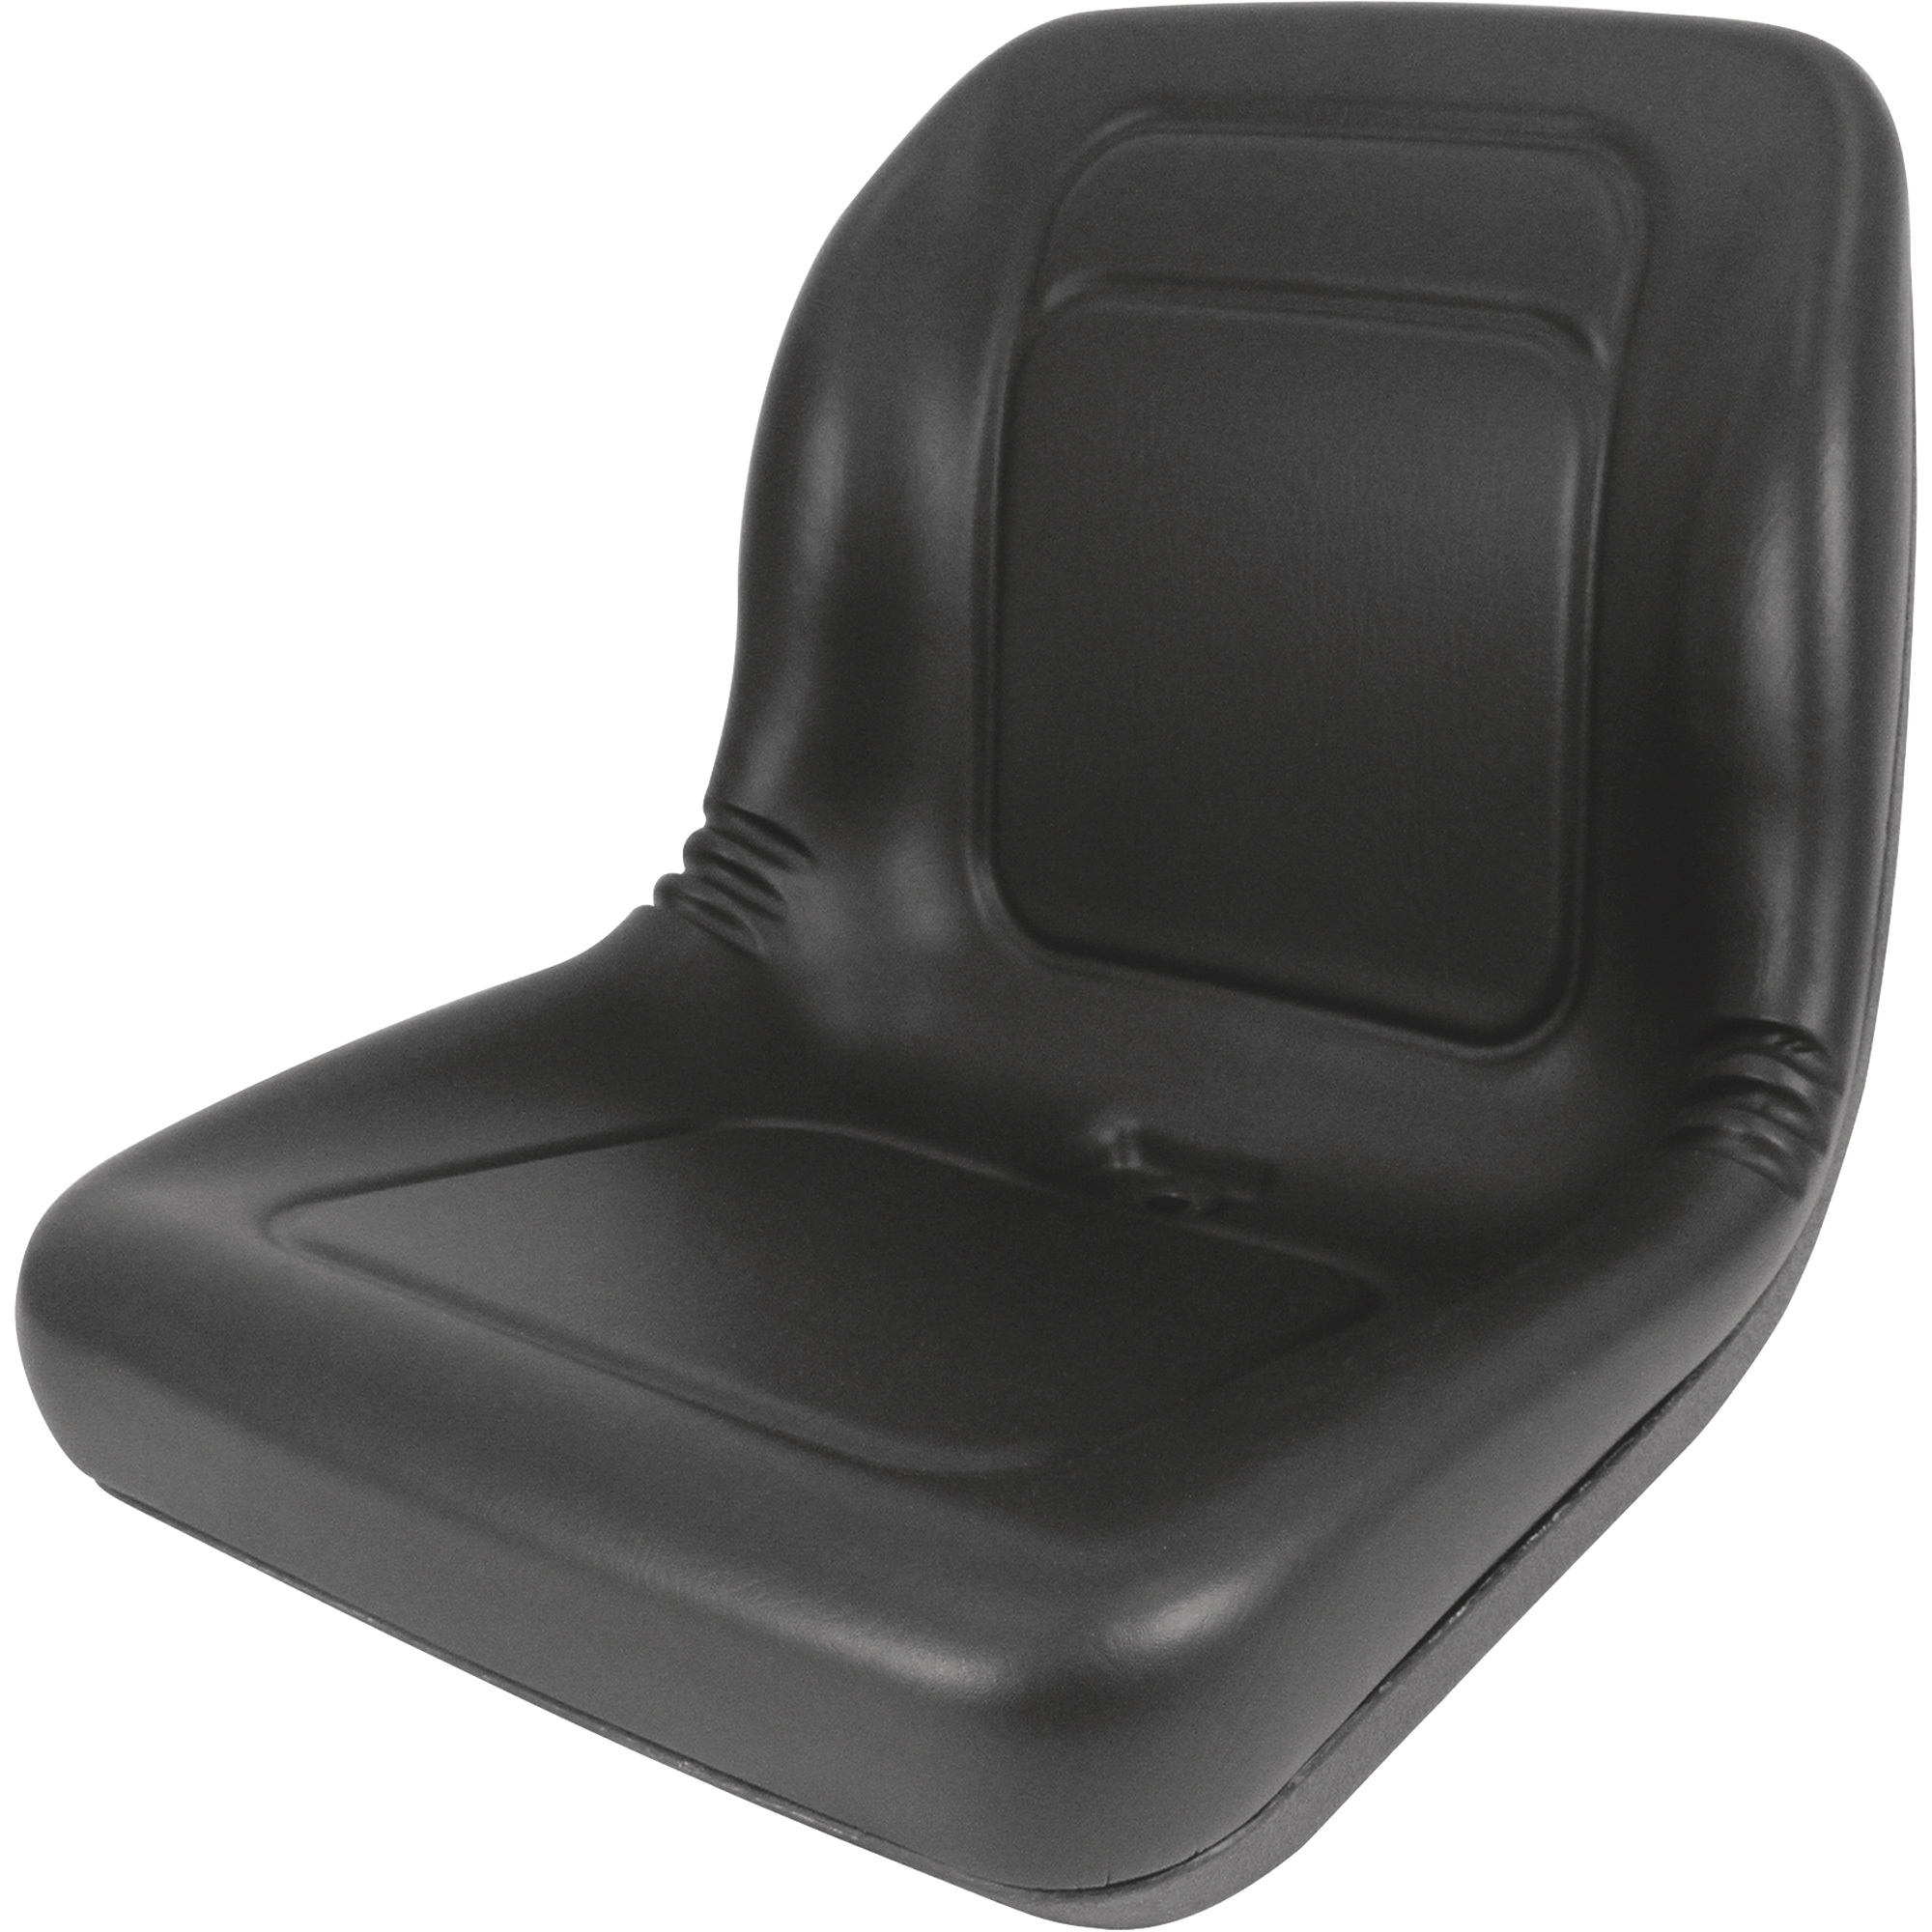 A&I Midback Tractor/Utility Seat â Black, Model #LGT100BL